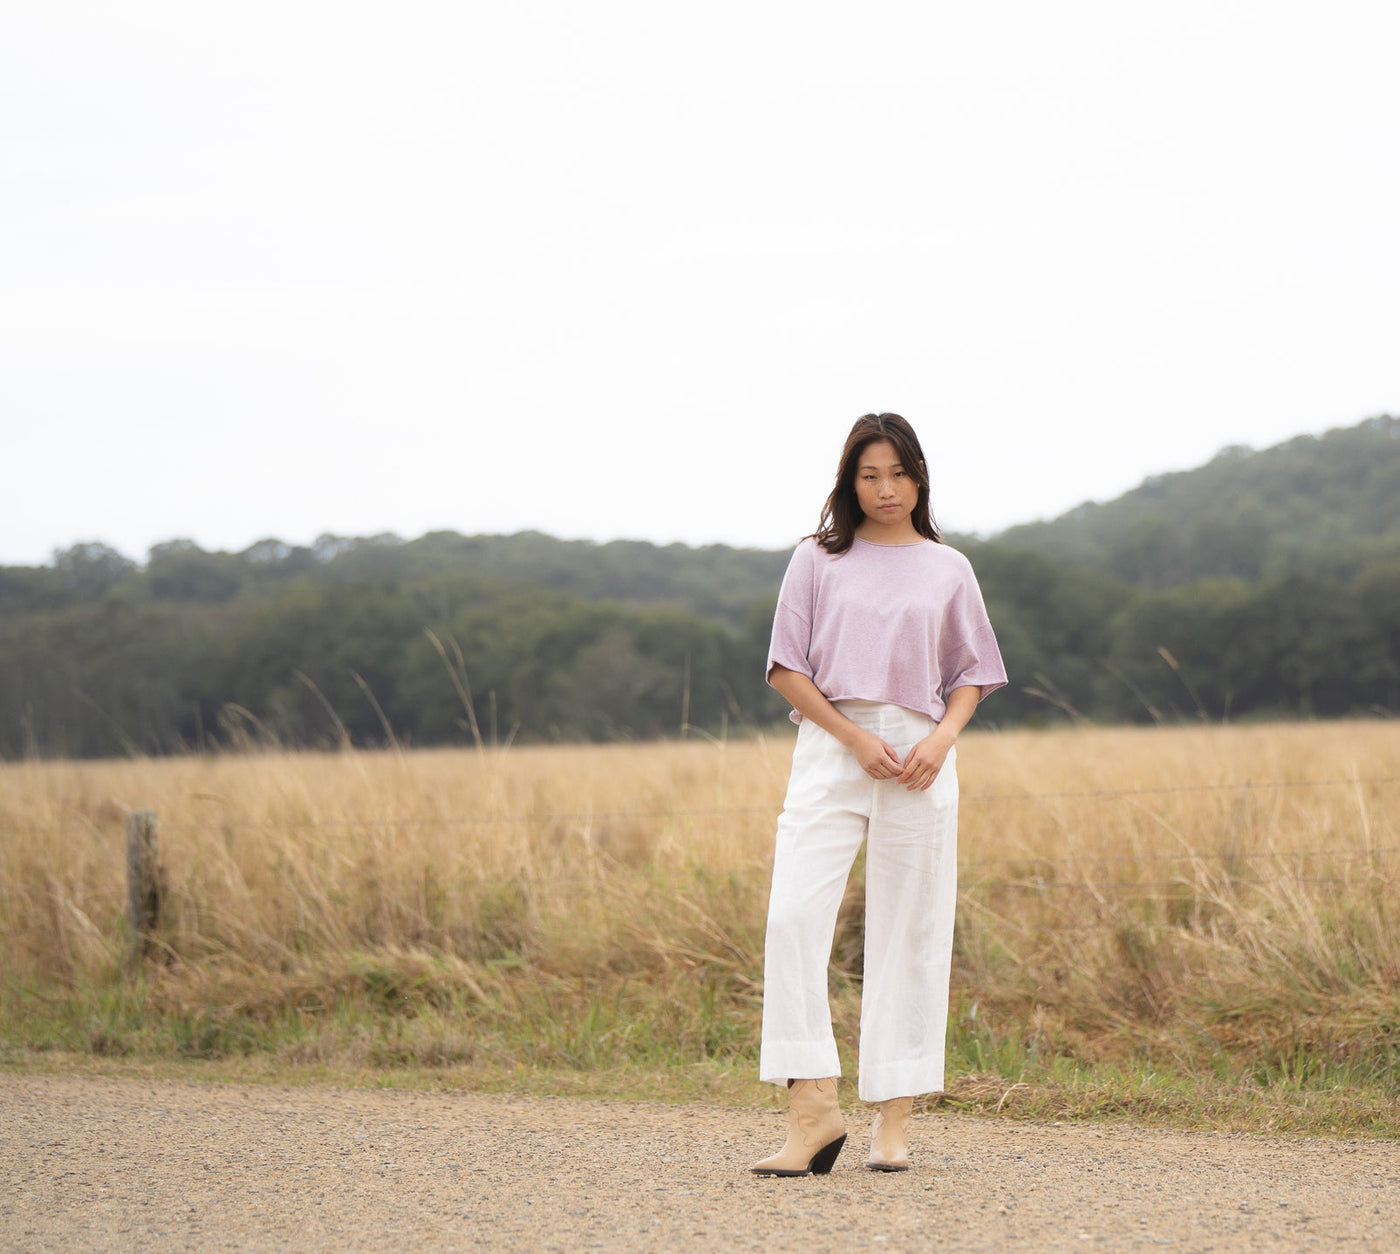 LILLY PILLY cashmere, organic cotton and merino wool knitwear collection